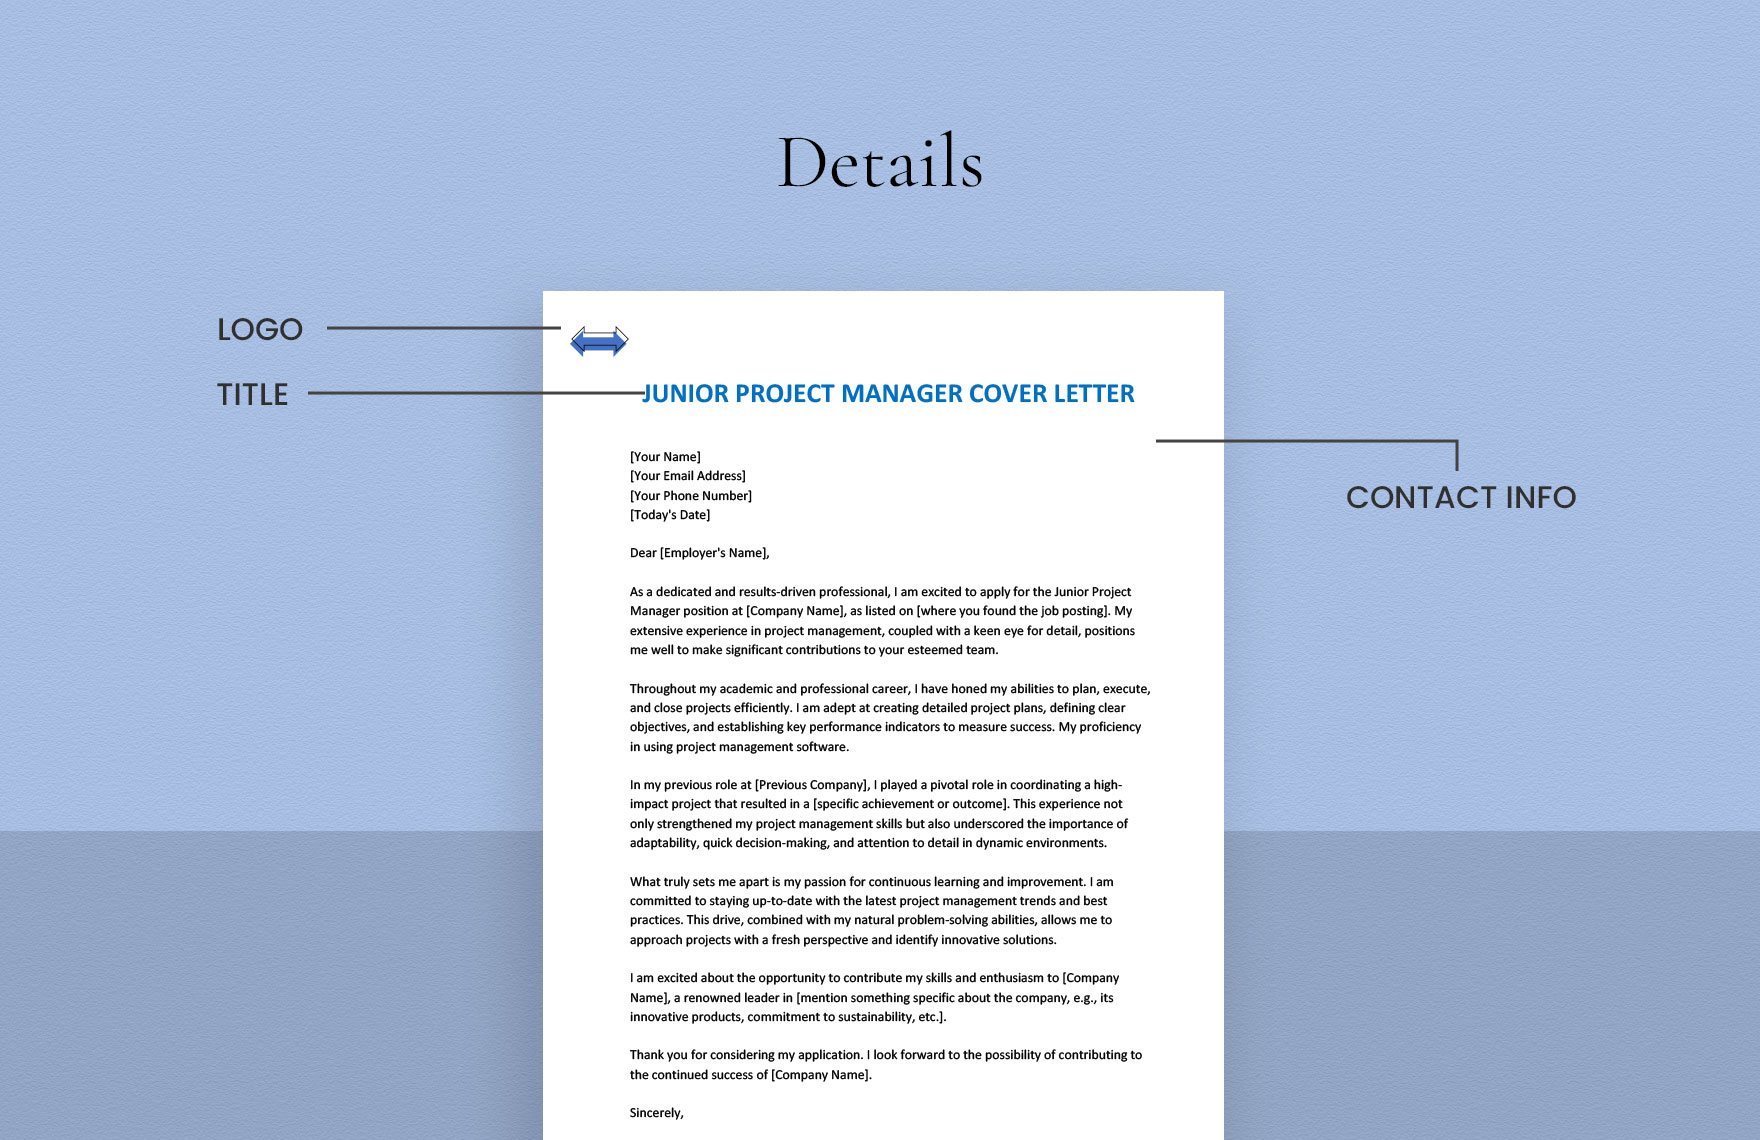 Junior Project Manager Cover Letter